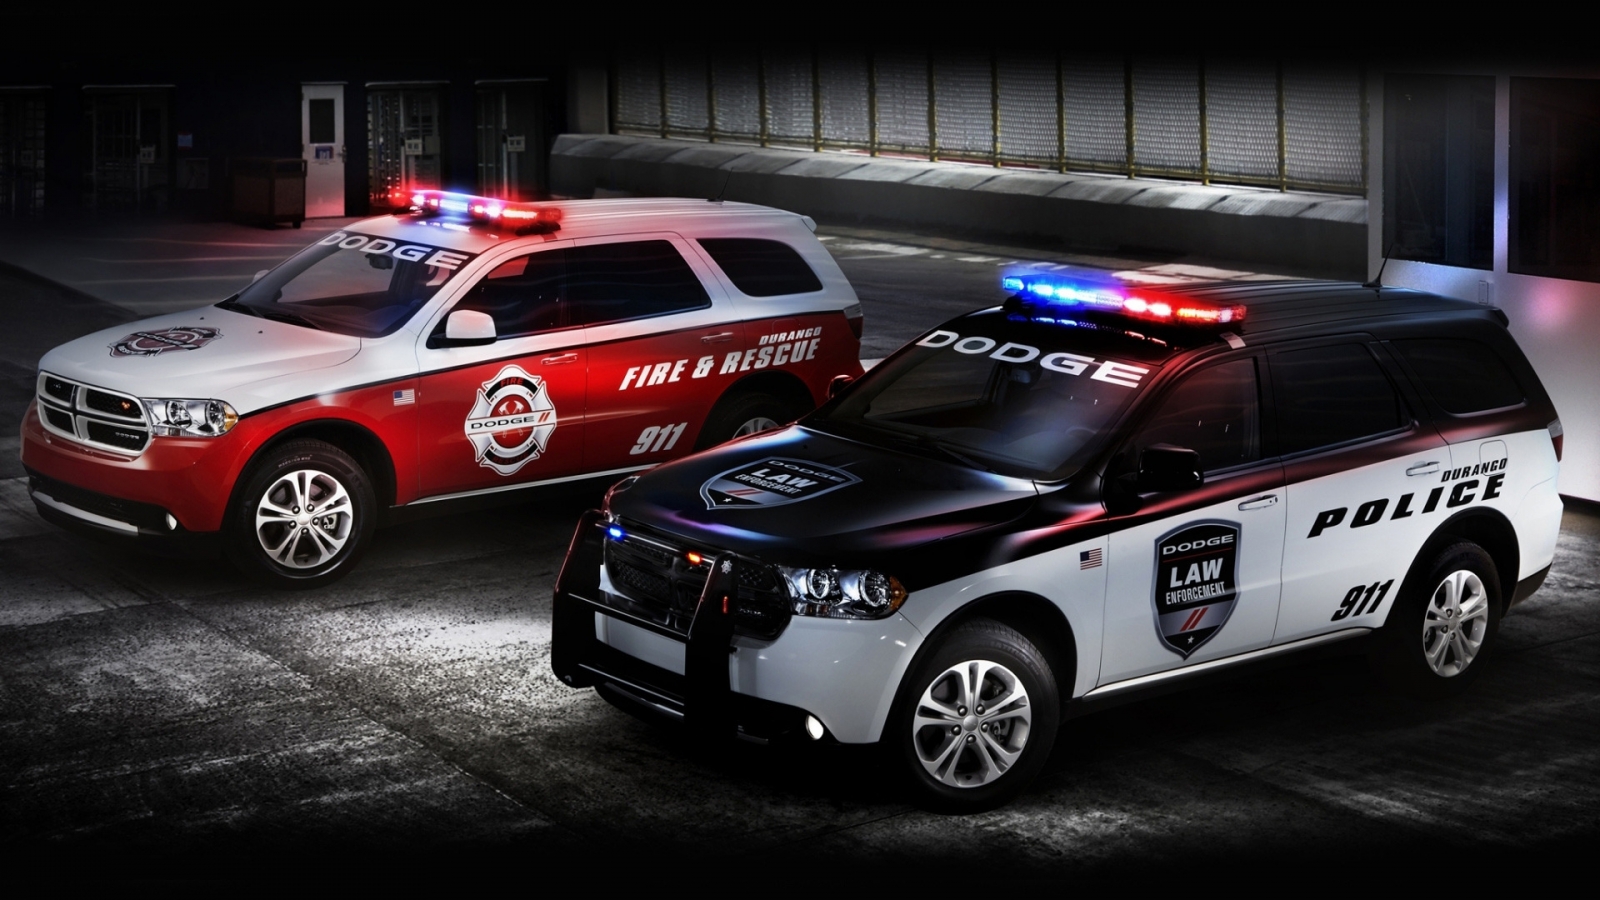 Dodge Police and Fire Cars for 1600 x 900 HDTV resolution